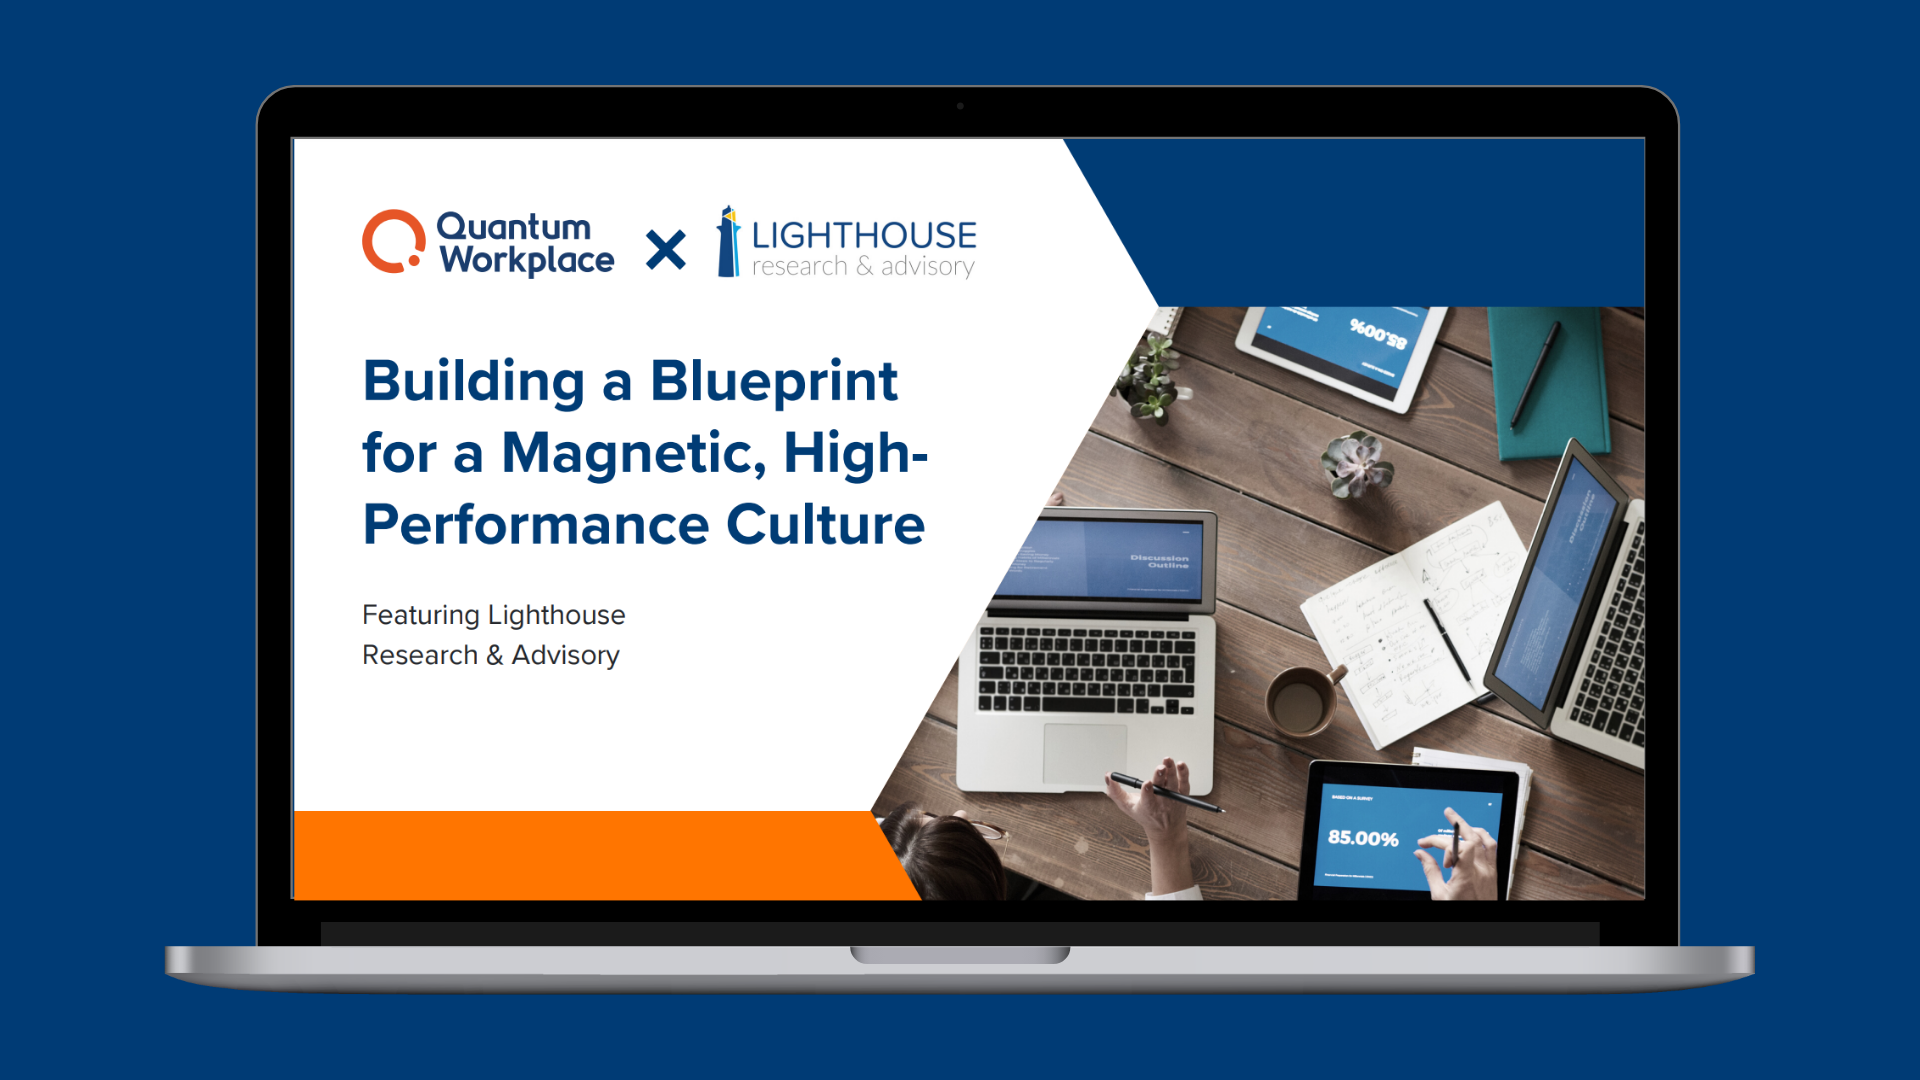 Building a Blueprint for a Magnetic, High-Performance Culture